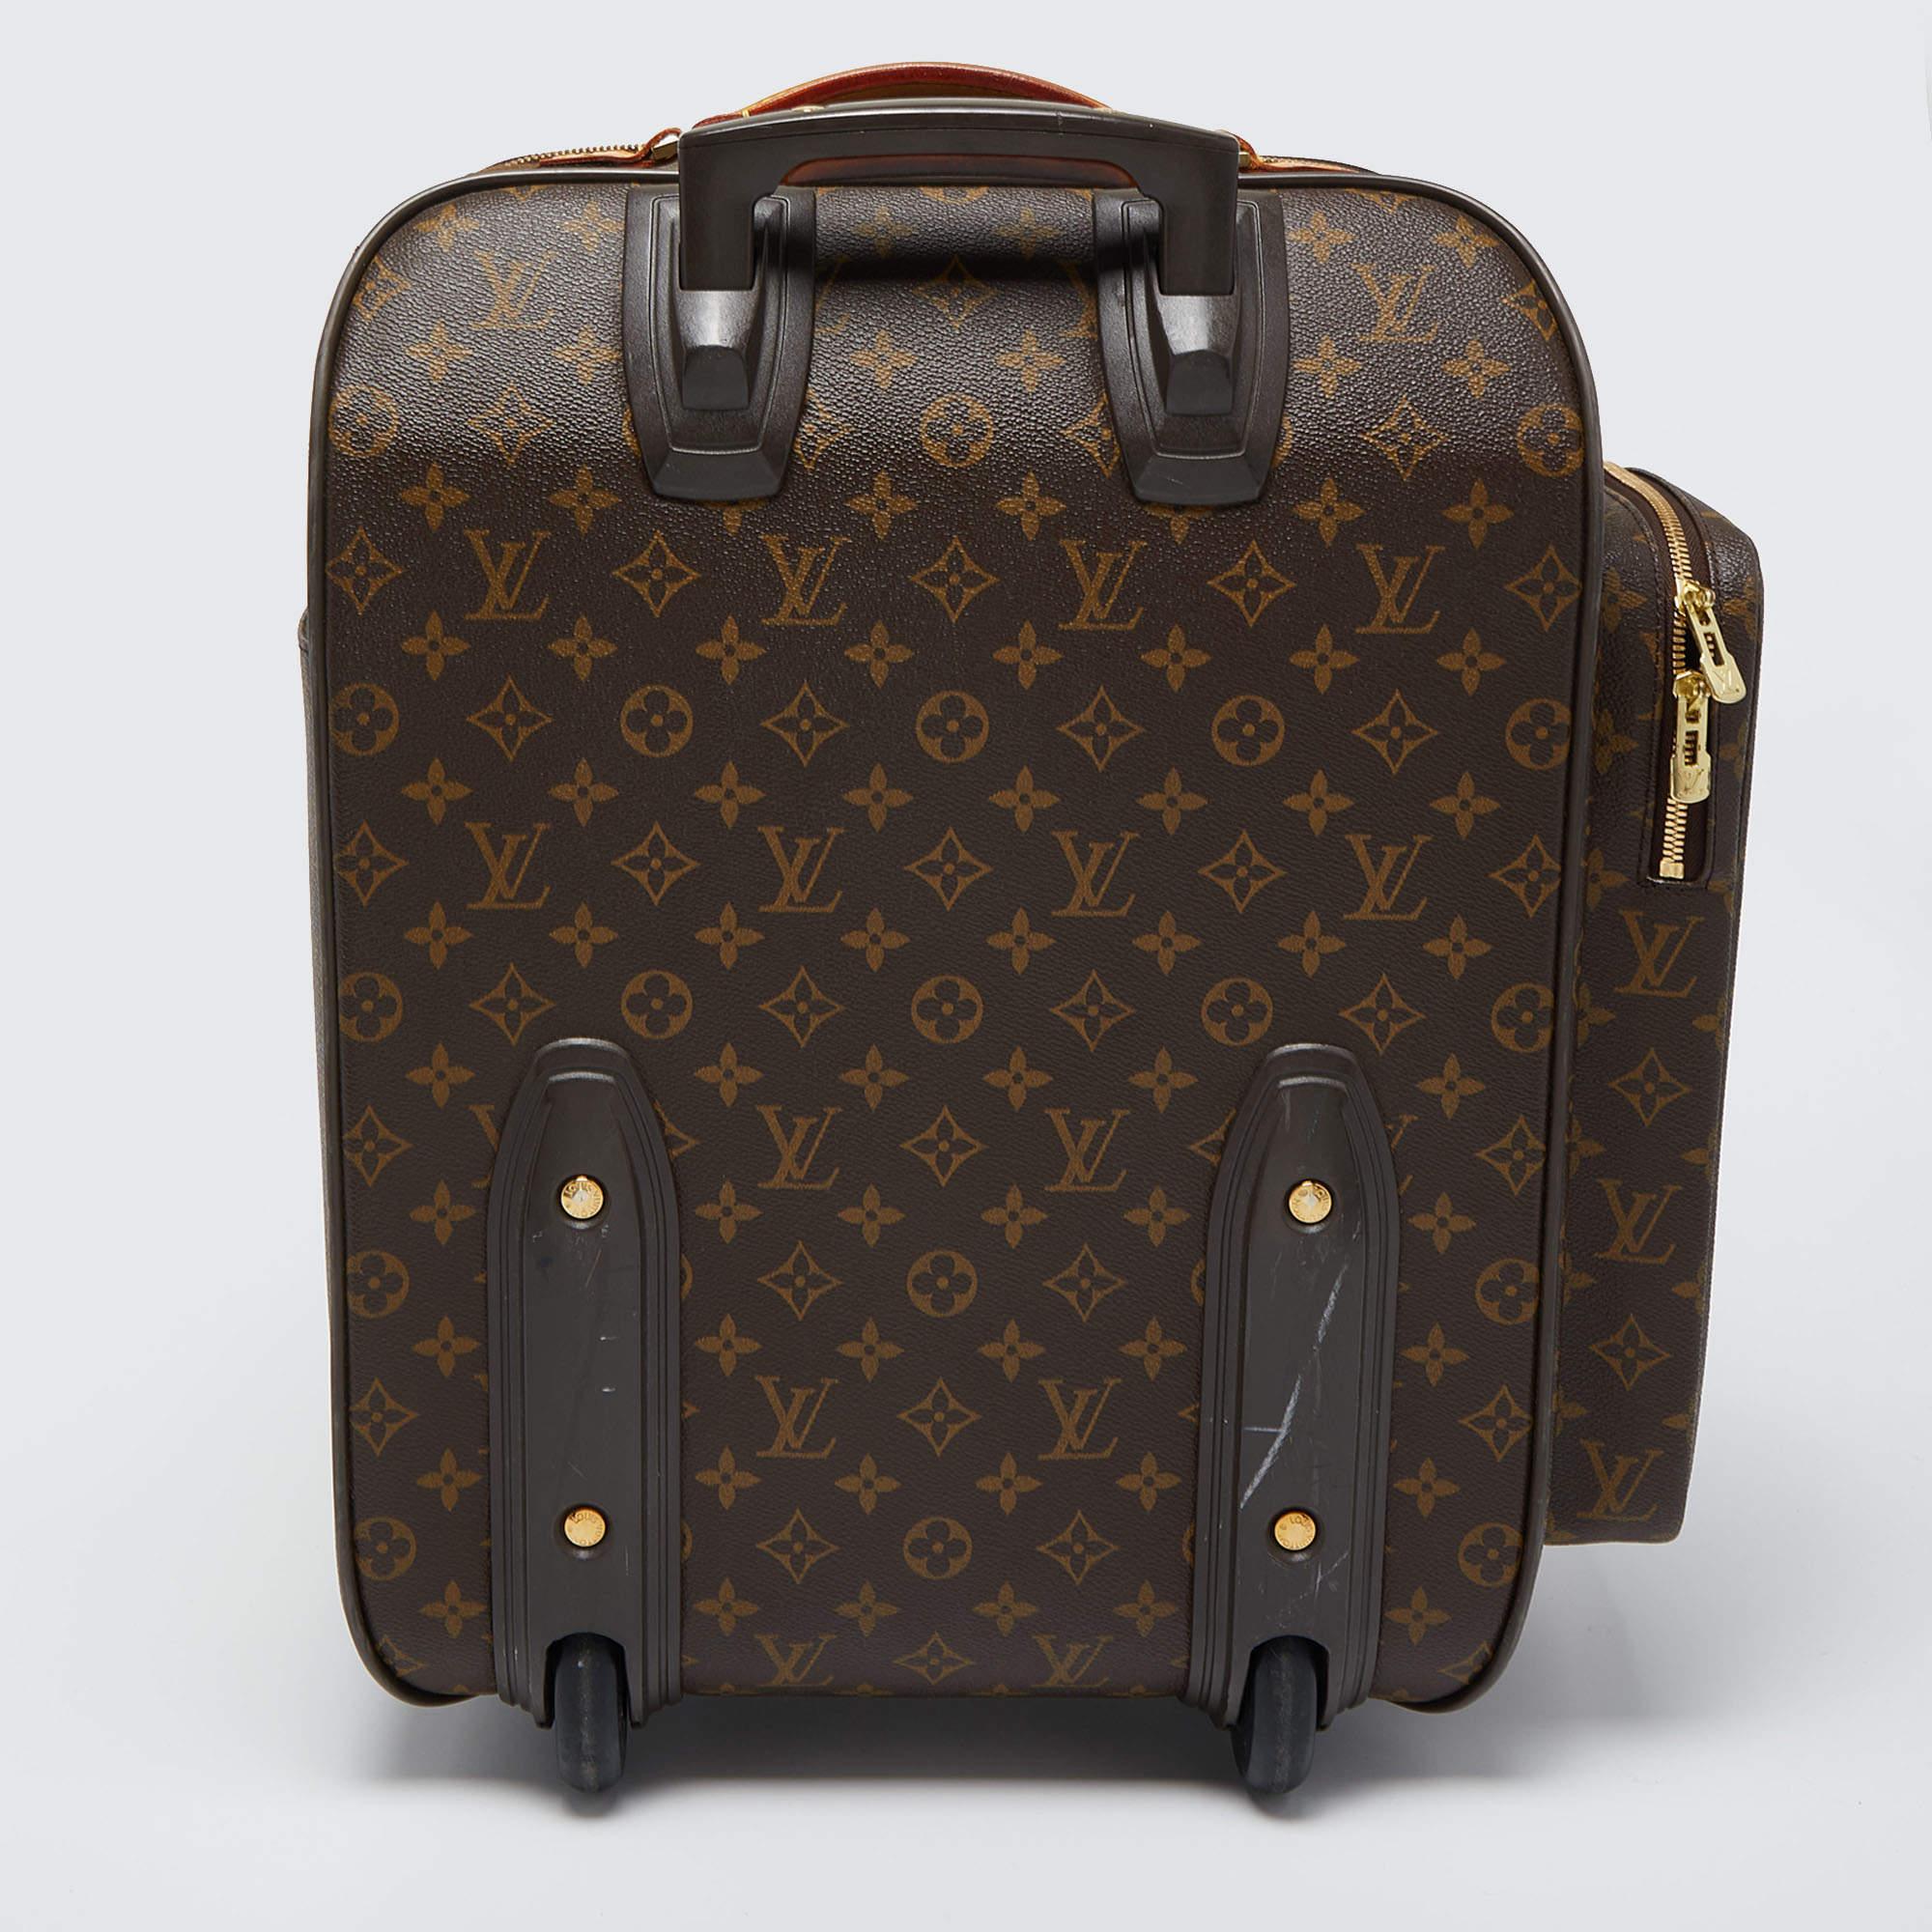 A traveling partner to trust and treasure is this one from Louis Vuitton. The exterior has been crafted from Monogram canvas while the spacious interior is lined with nylon. Equipped with zip compartments on the exterior, a sturdy handle, two